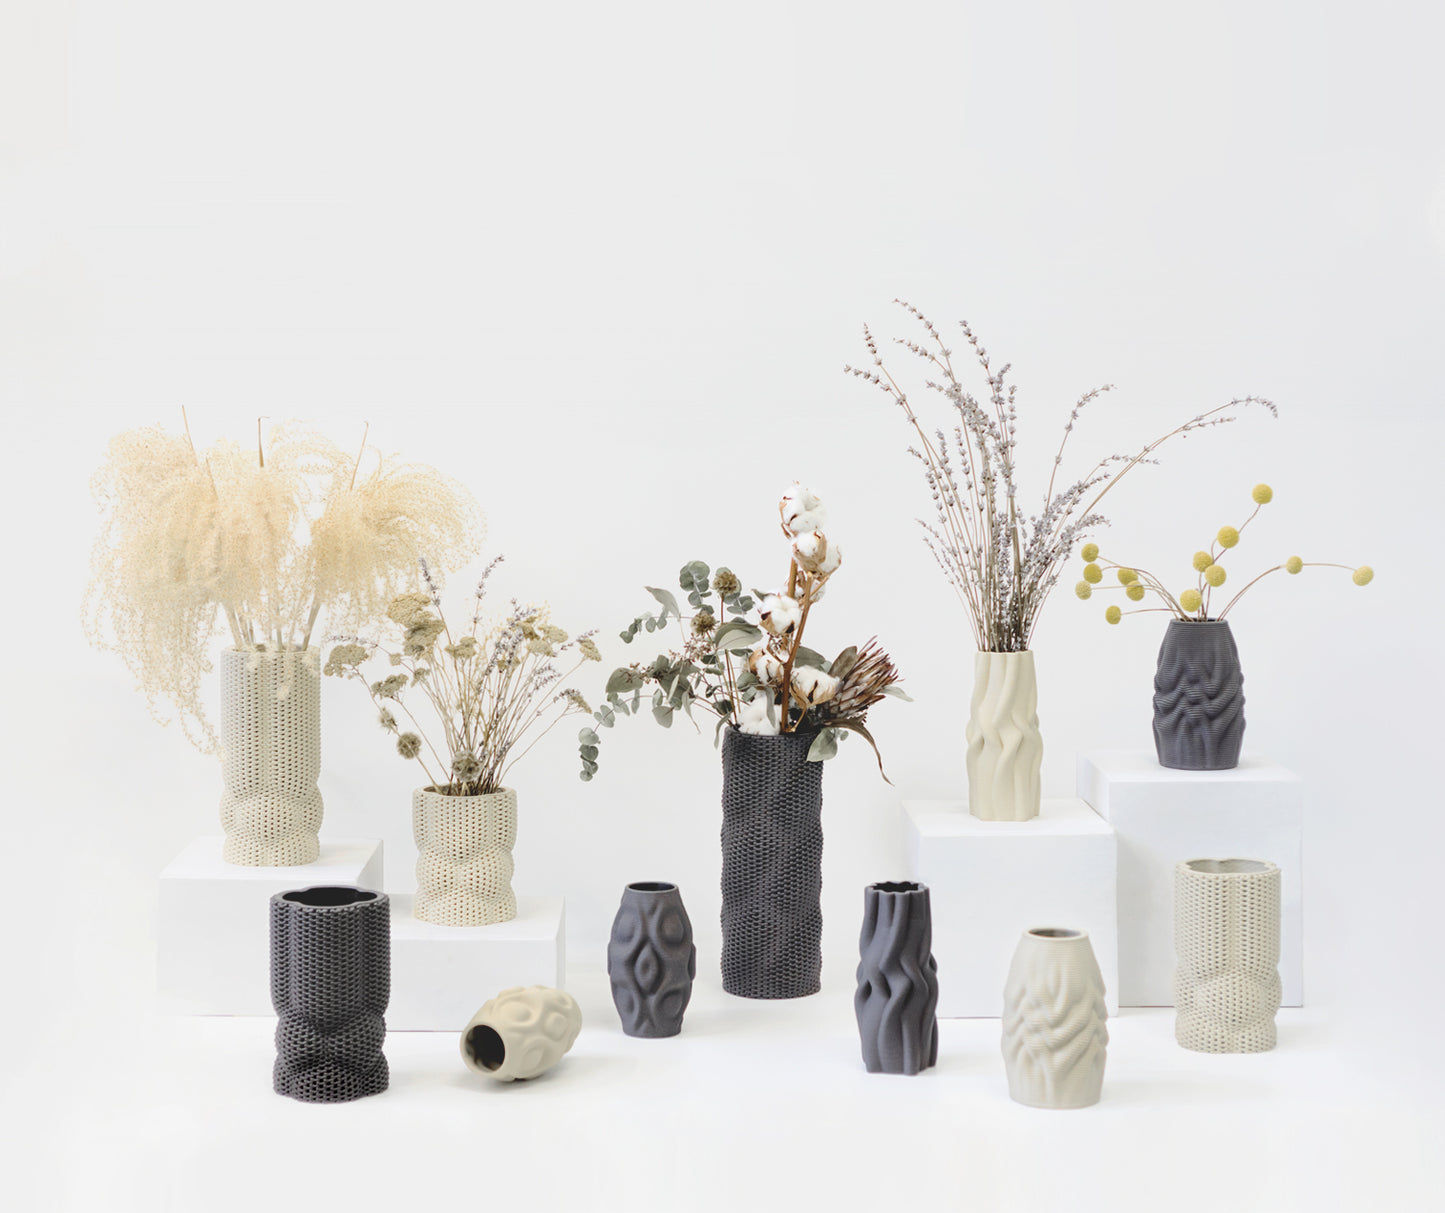 Header Image of the 3d printed ceramic collection by Drag And Drop